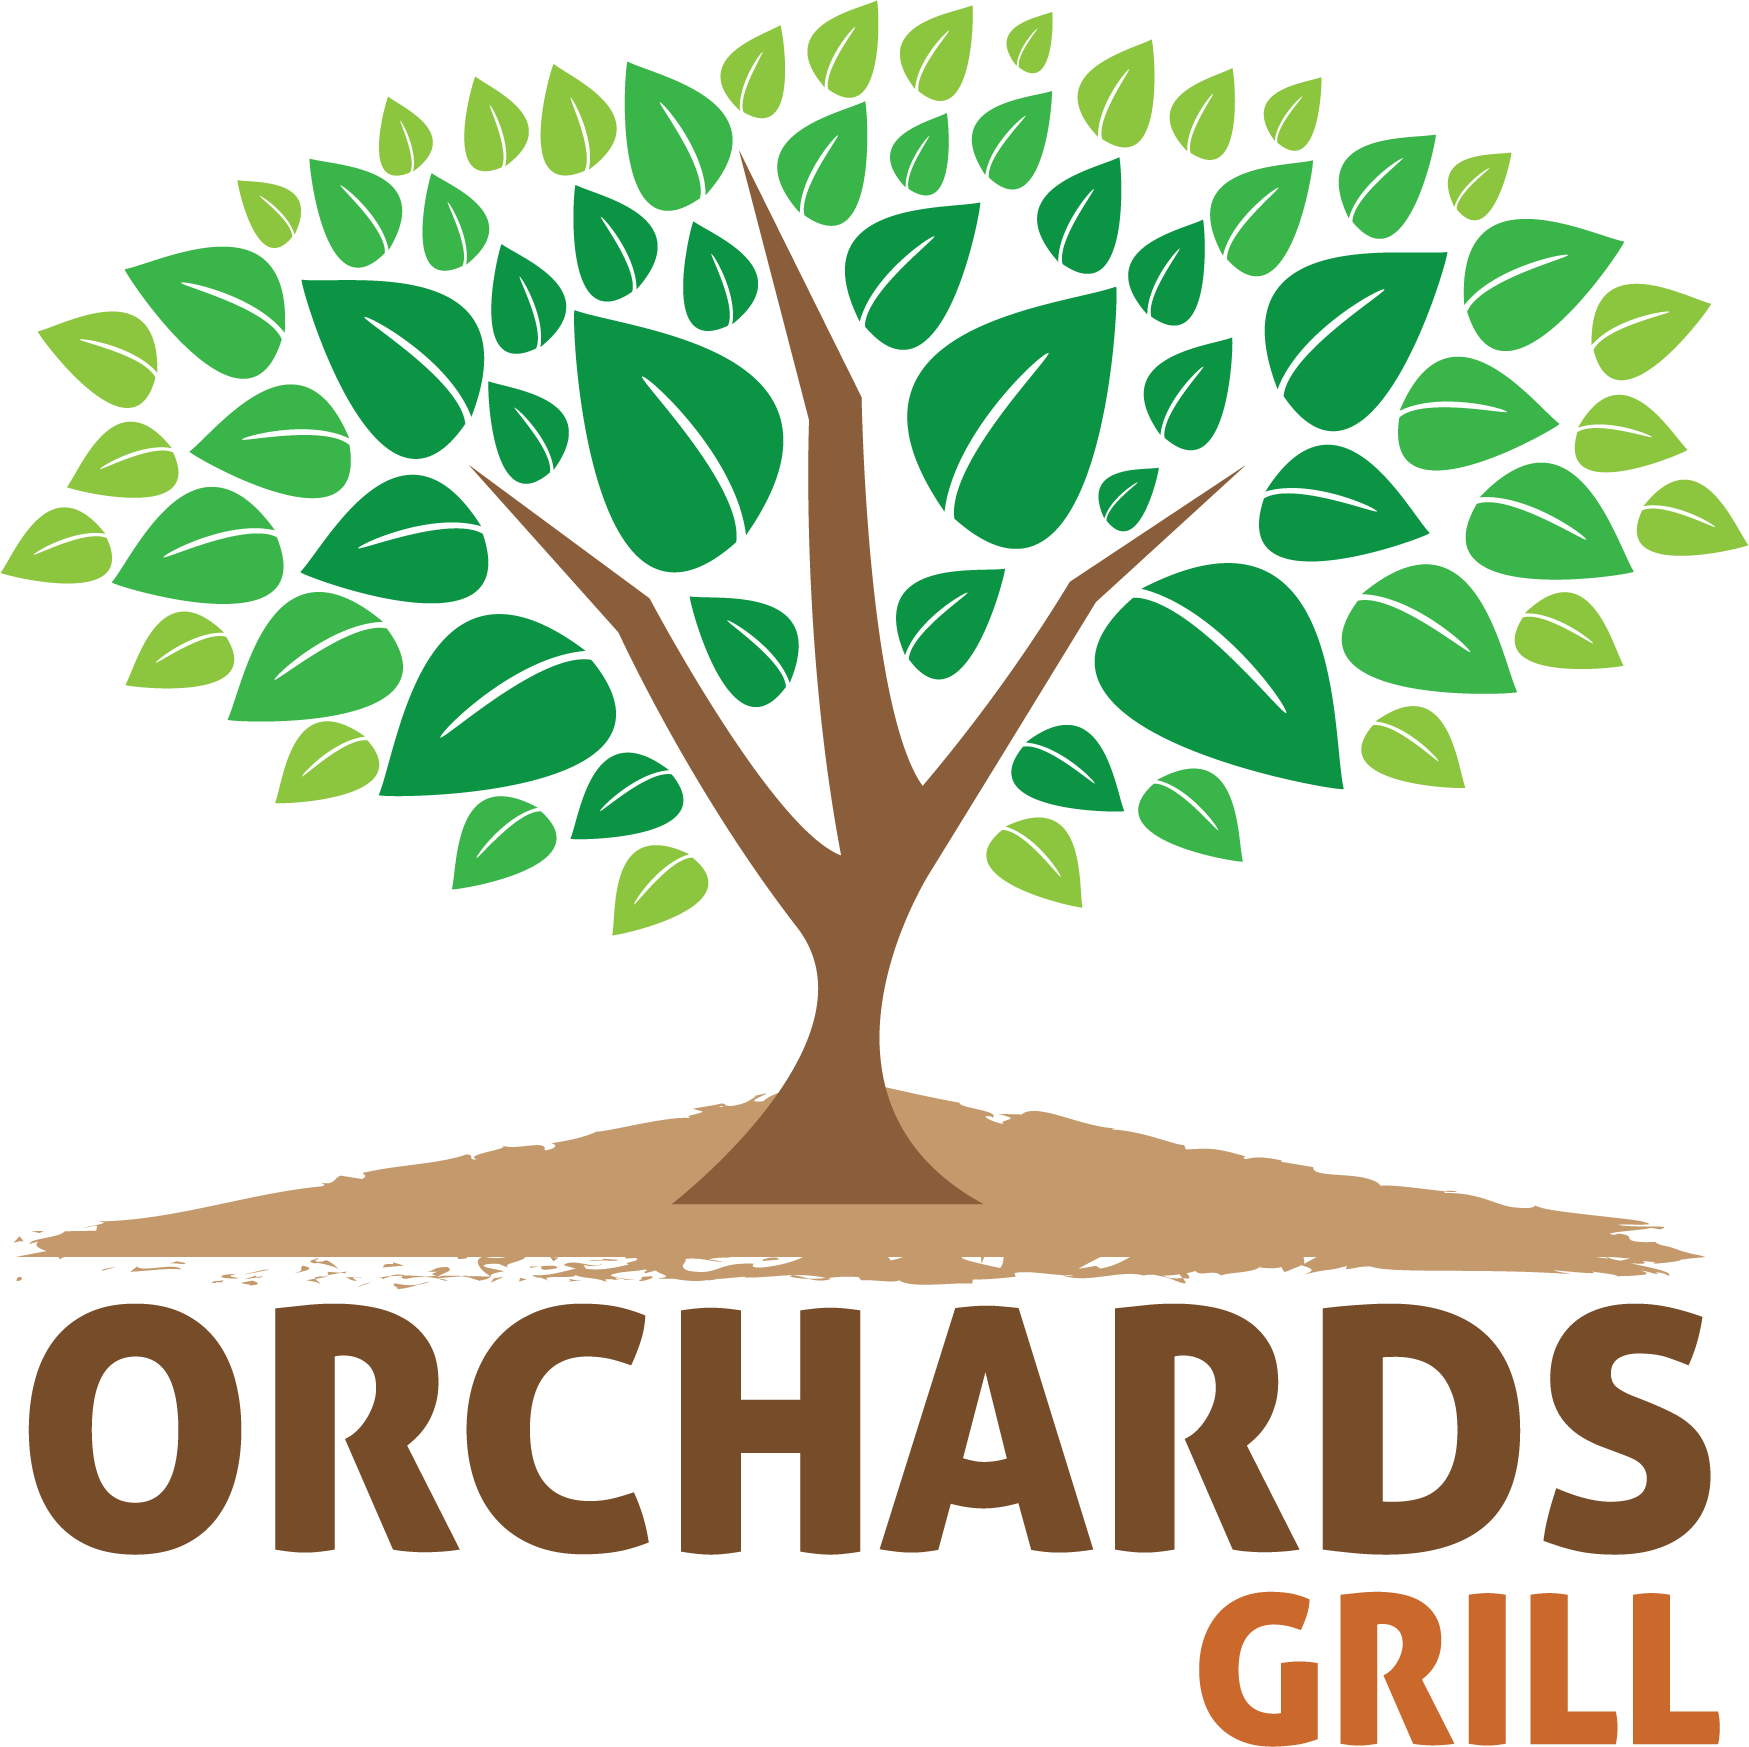 Orchards Grill - Orchards Grill At Oga Golf Course (1749x1747)